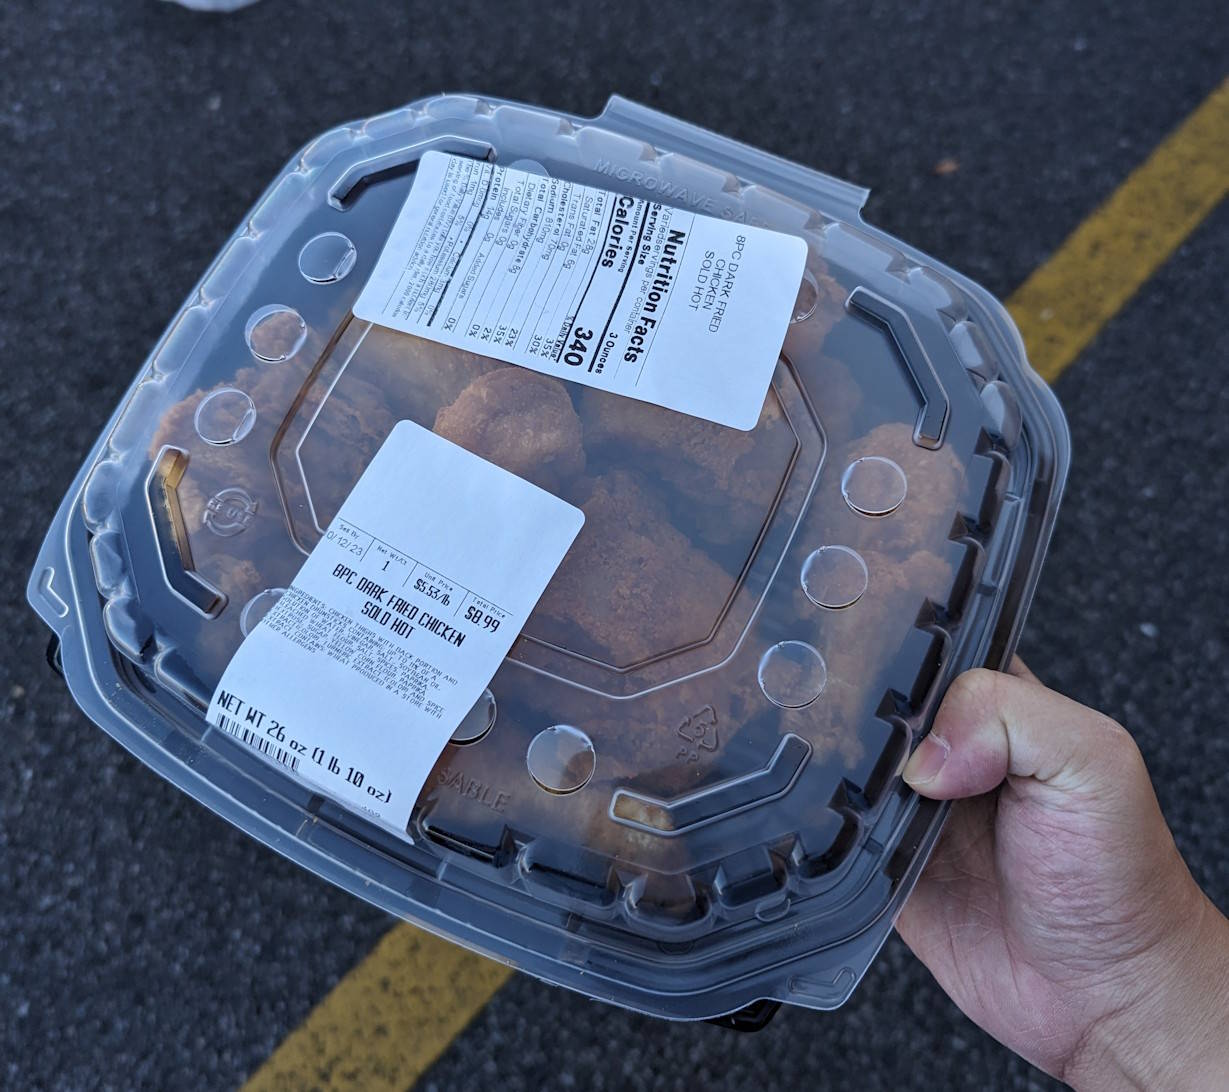 I'm holding an 8-piece box of dark fried chicken from ShopRite while walking in a parking lot. It's $9 for 8 pieces.